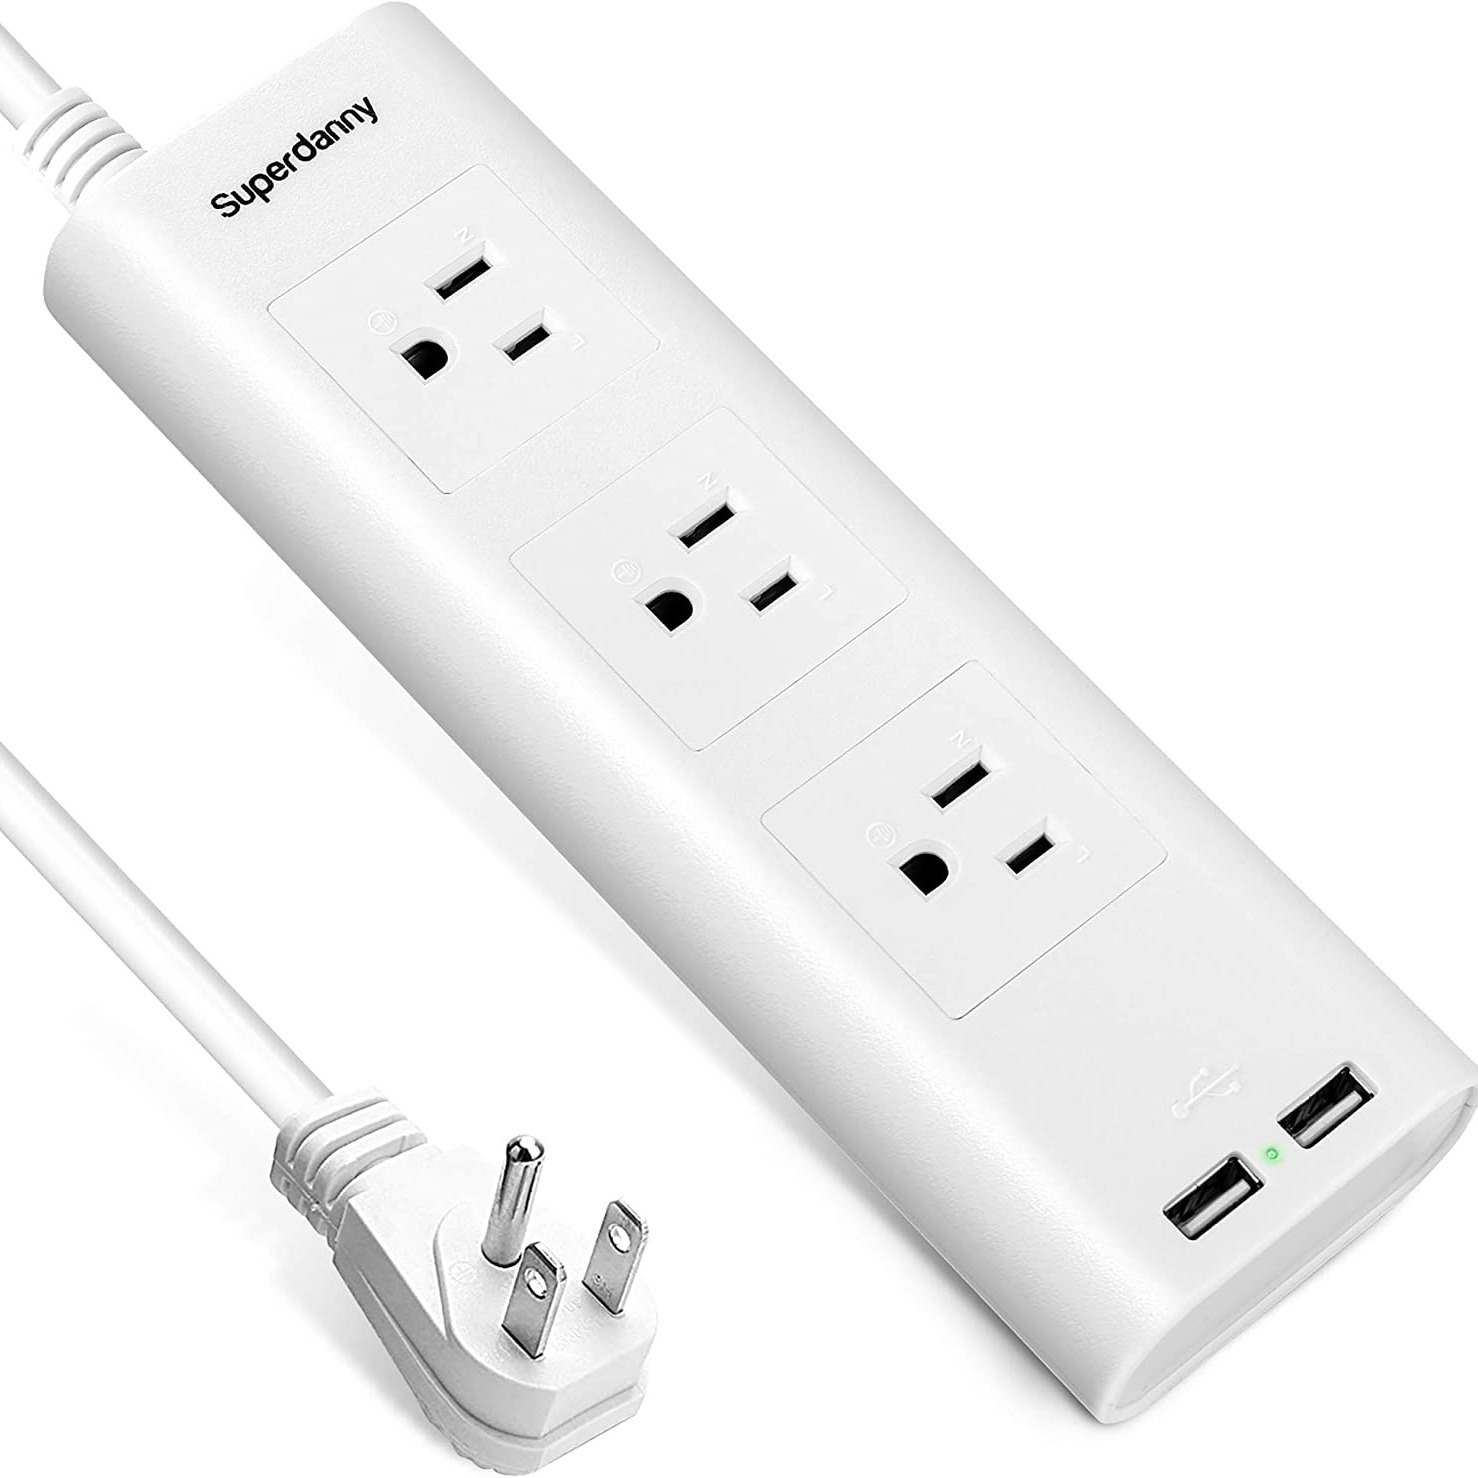 SUPERDANNY 3 Outlets 2 USB Ports Power Strip 10ft Long Cord MDL TP FA2U3S